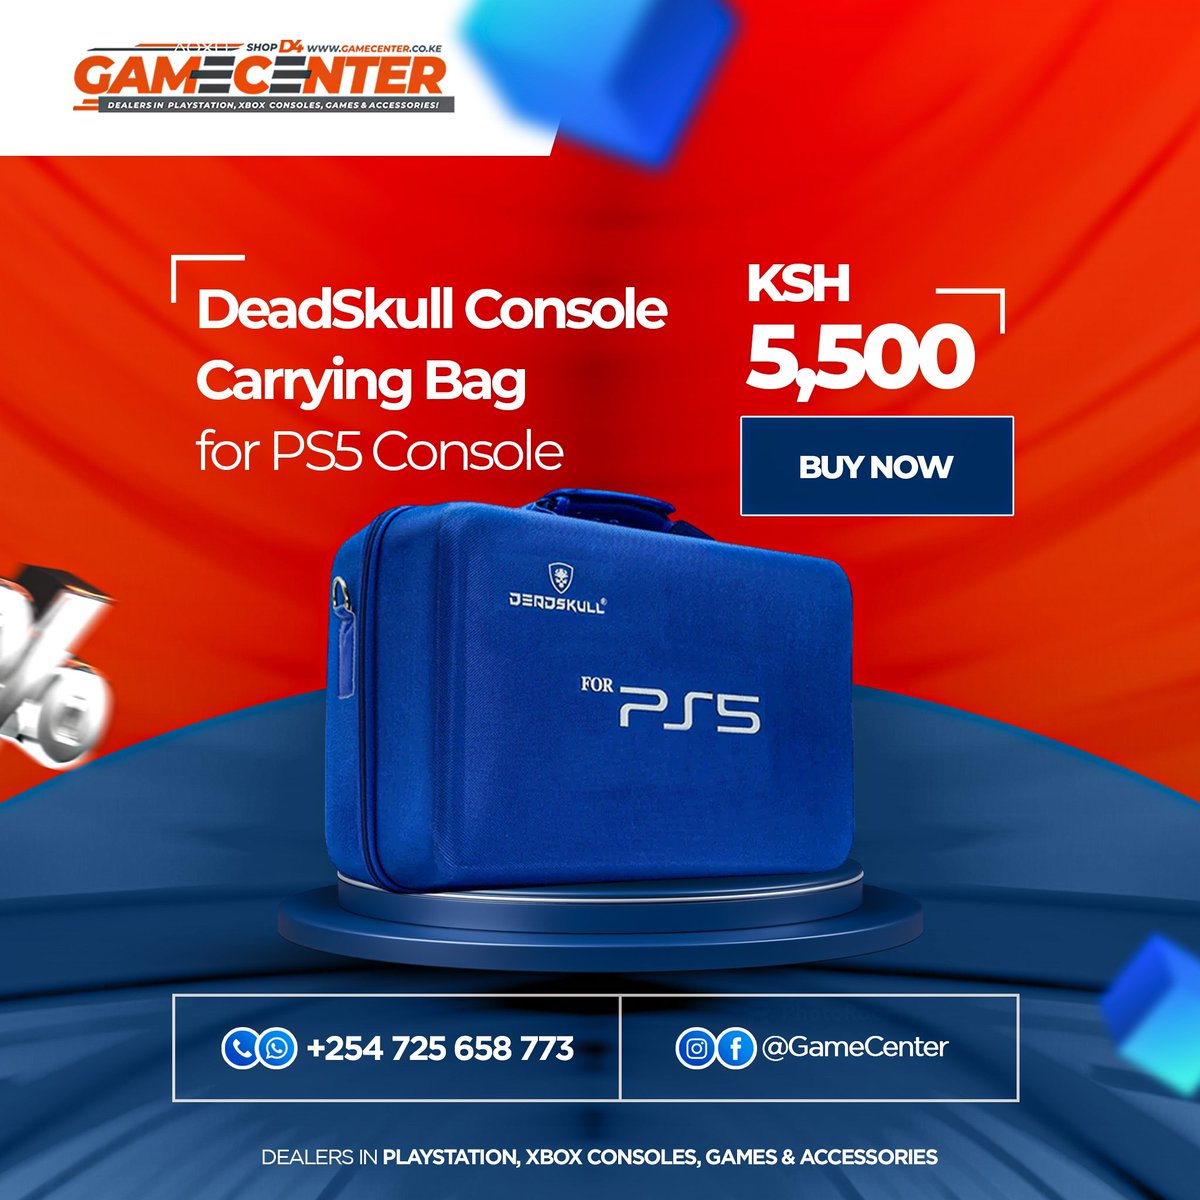 This travel bag is specially designed for PS5. This for PS5 handbag / shoulder diagonal has a spacious and customizable interior, whether it is for dualshock 5 console, AC power cord, USB cable, headset, game disc or other accessories you need for this ps5 handbag.